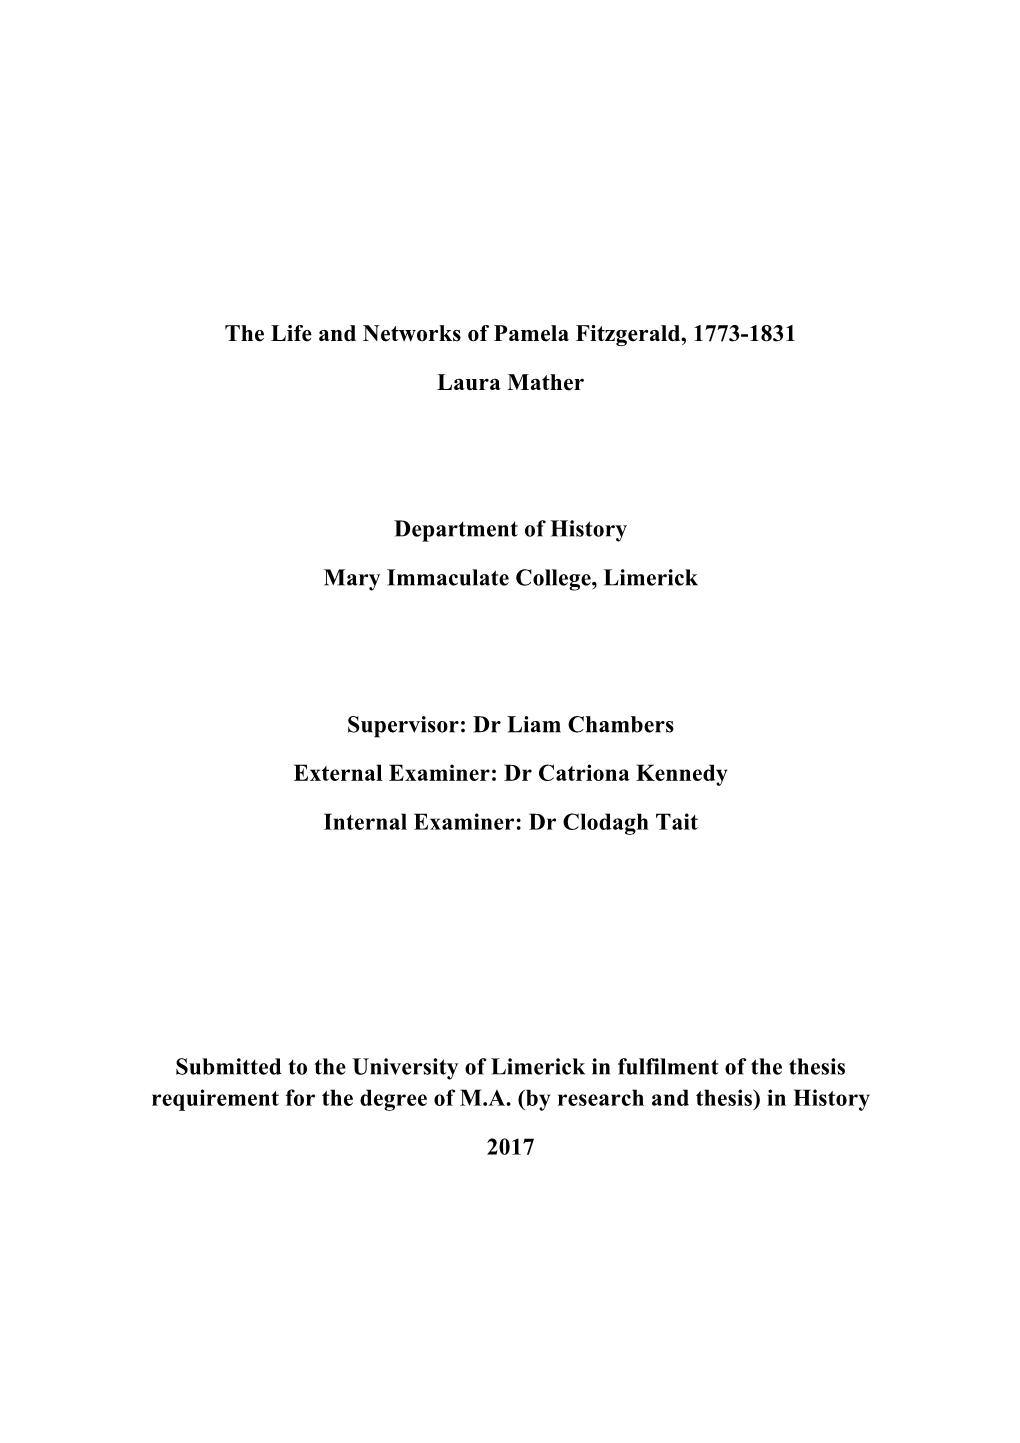 The Life and Networks of Pamela Fitzgerald, 1773-1831. MA.Pdf